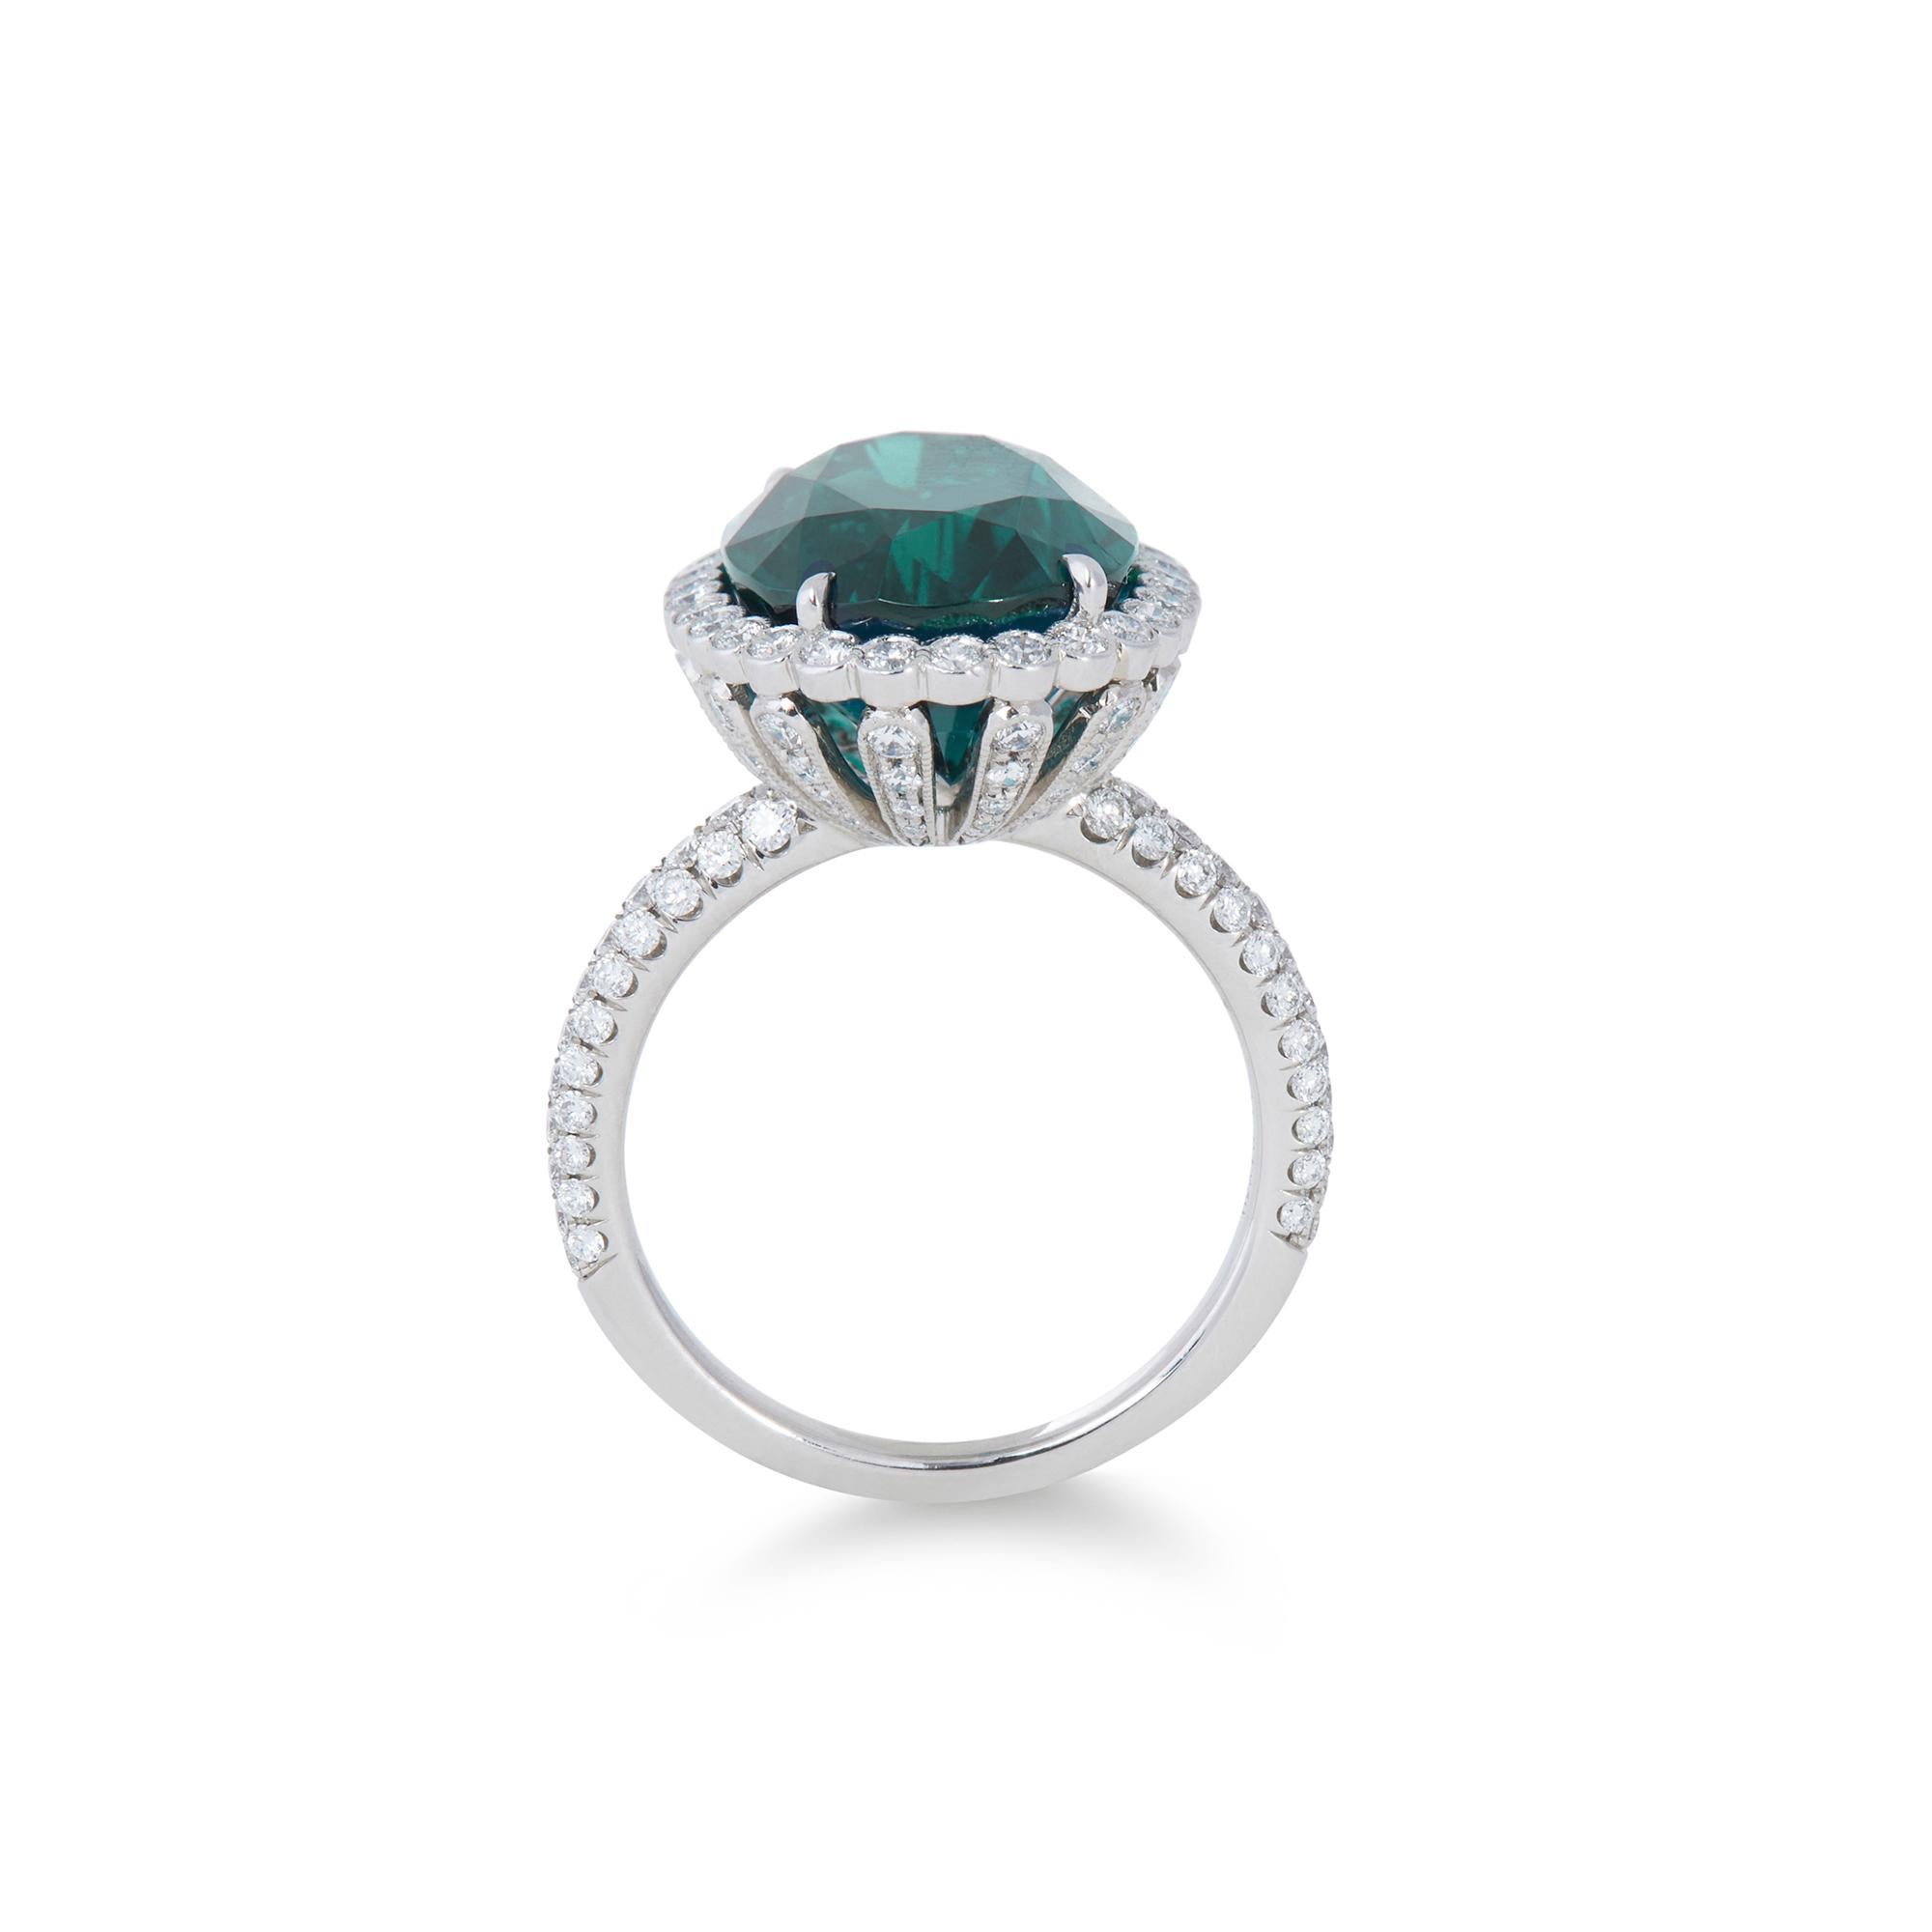 Authentic Tiffany & Co. Soleste ring crafted in platinum.  The ring features a vibrant oval-shaped greenish-blue indicolite tourmaline of approximately 7.5 carats surrounded by a halo of bezel set diamonds and diamond encrusted gallery with fine